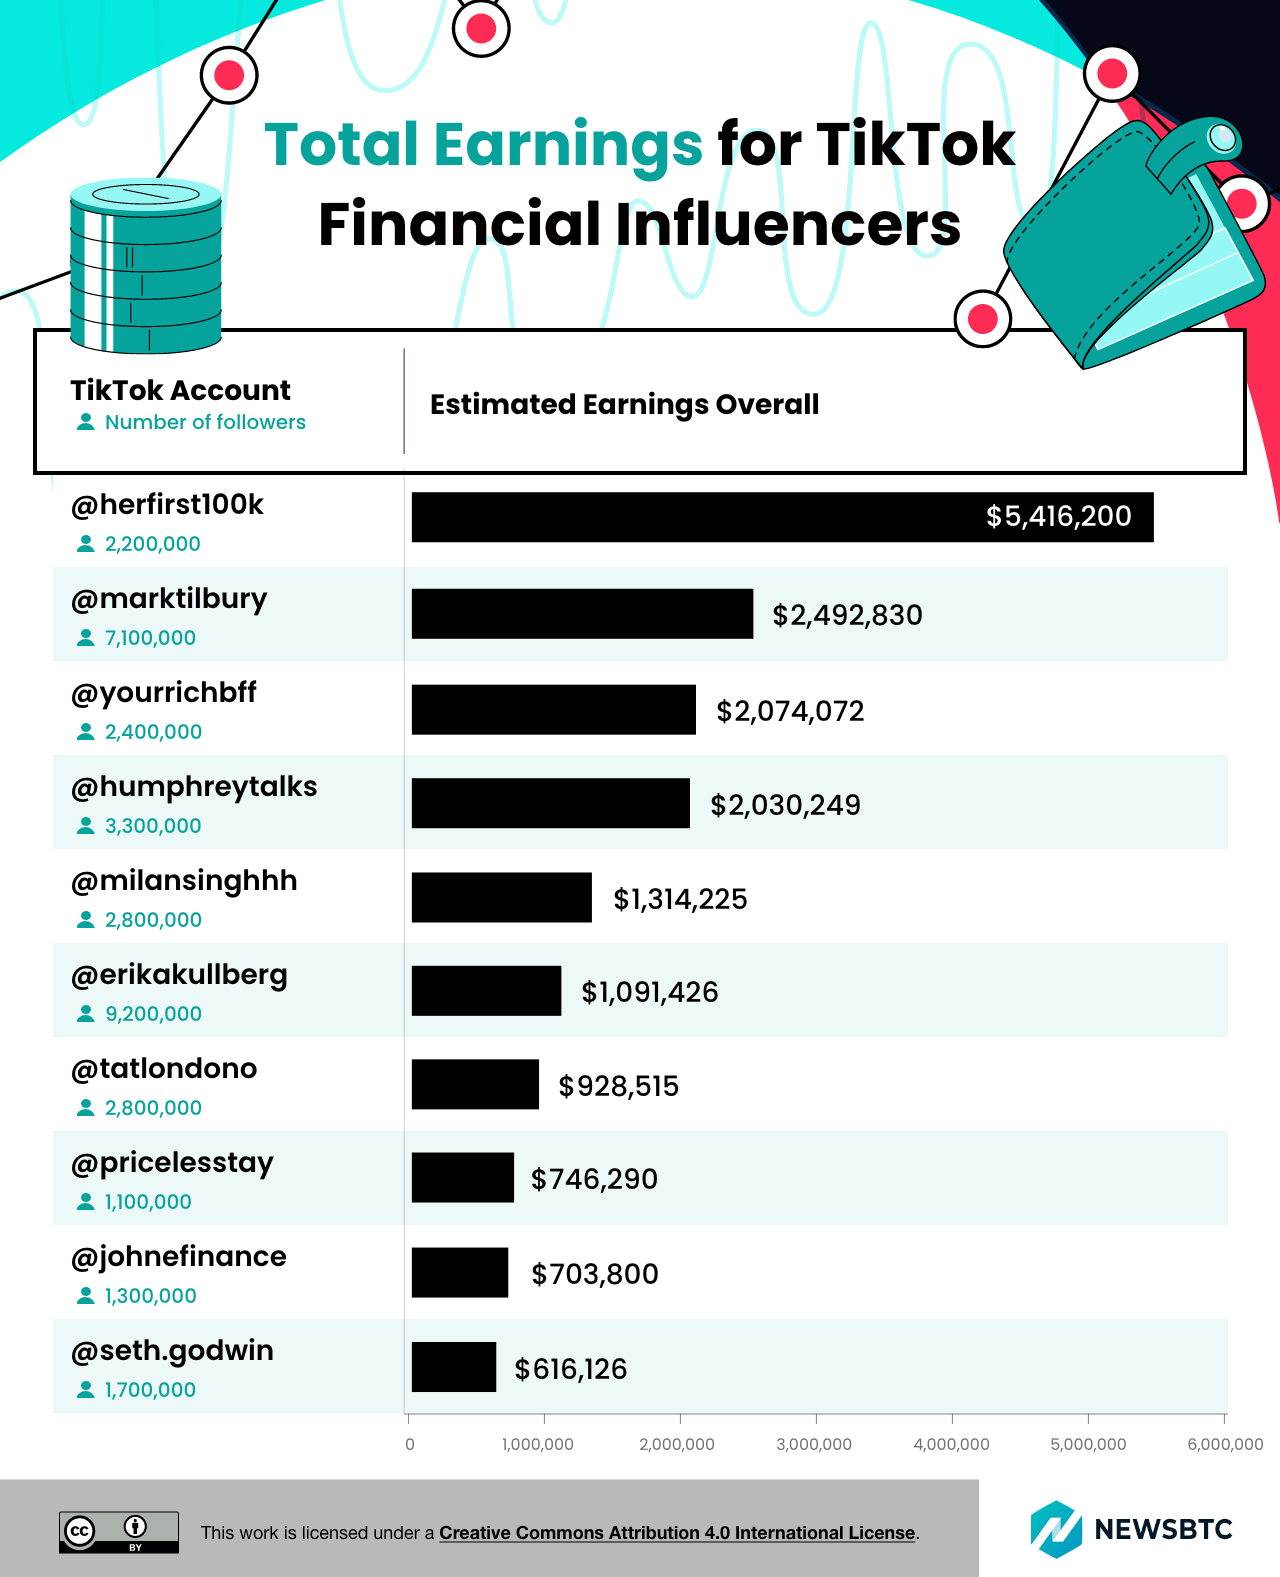 Total earnings for tiktok financial influencers